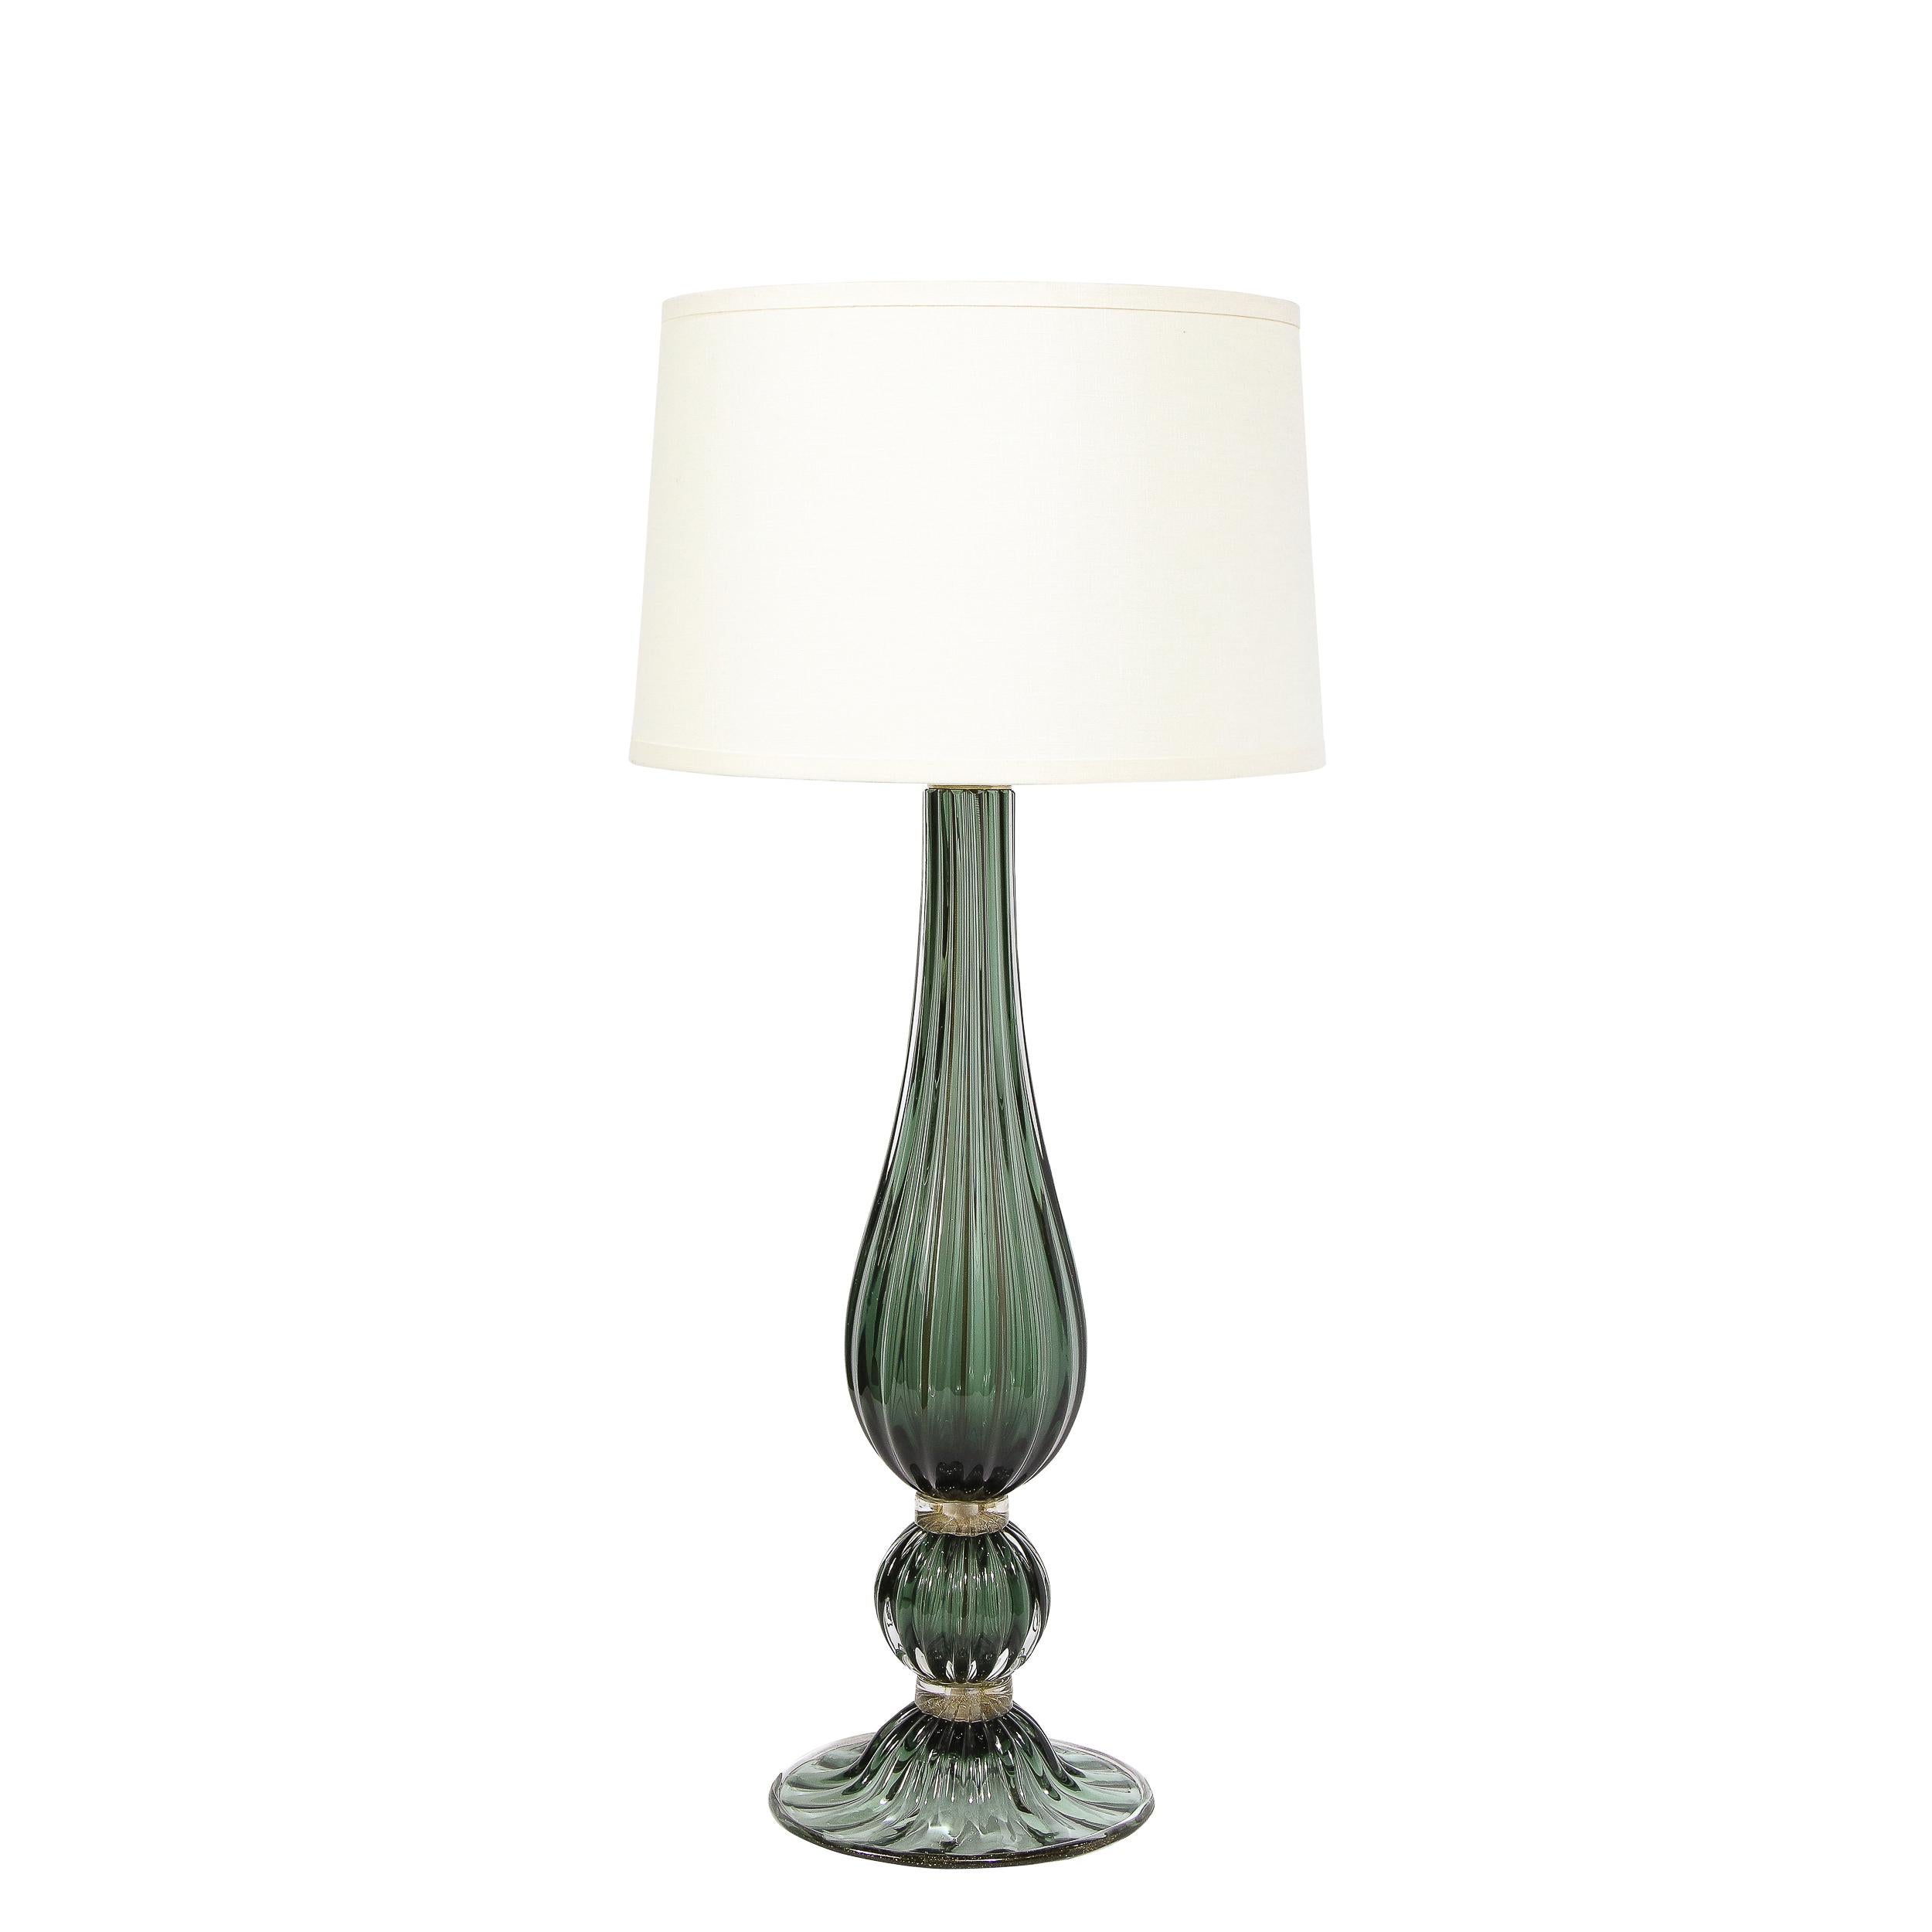 This stunning pair of table lamps were handblown in Murano, Italy- the island off the coast of Venice renowned for centuries for its superlative glass production. They feature tear drop form bodies in handblown translucent reeded glass banded near